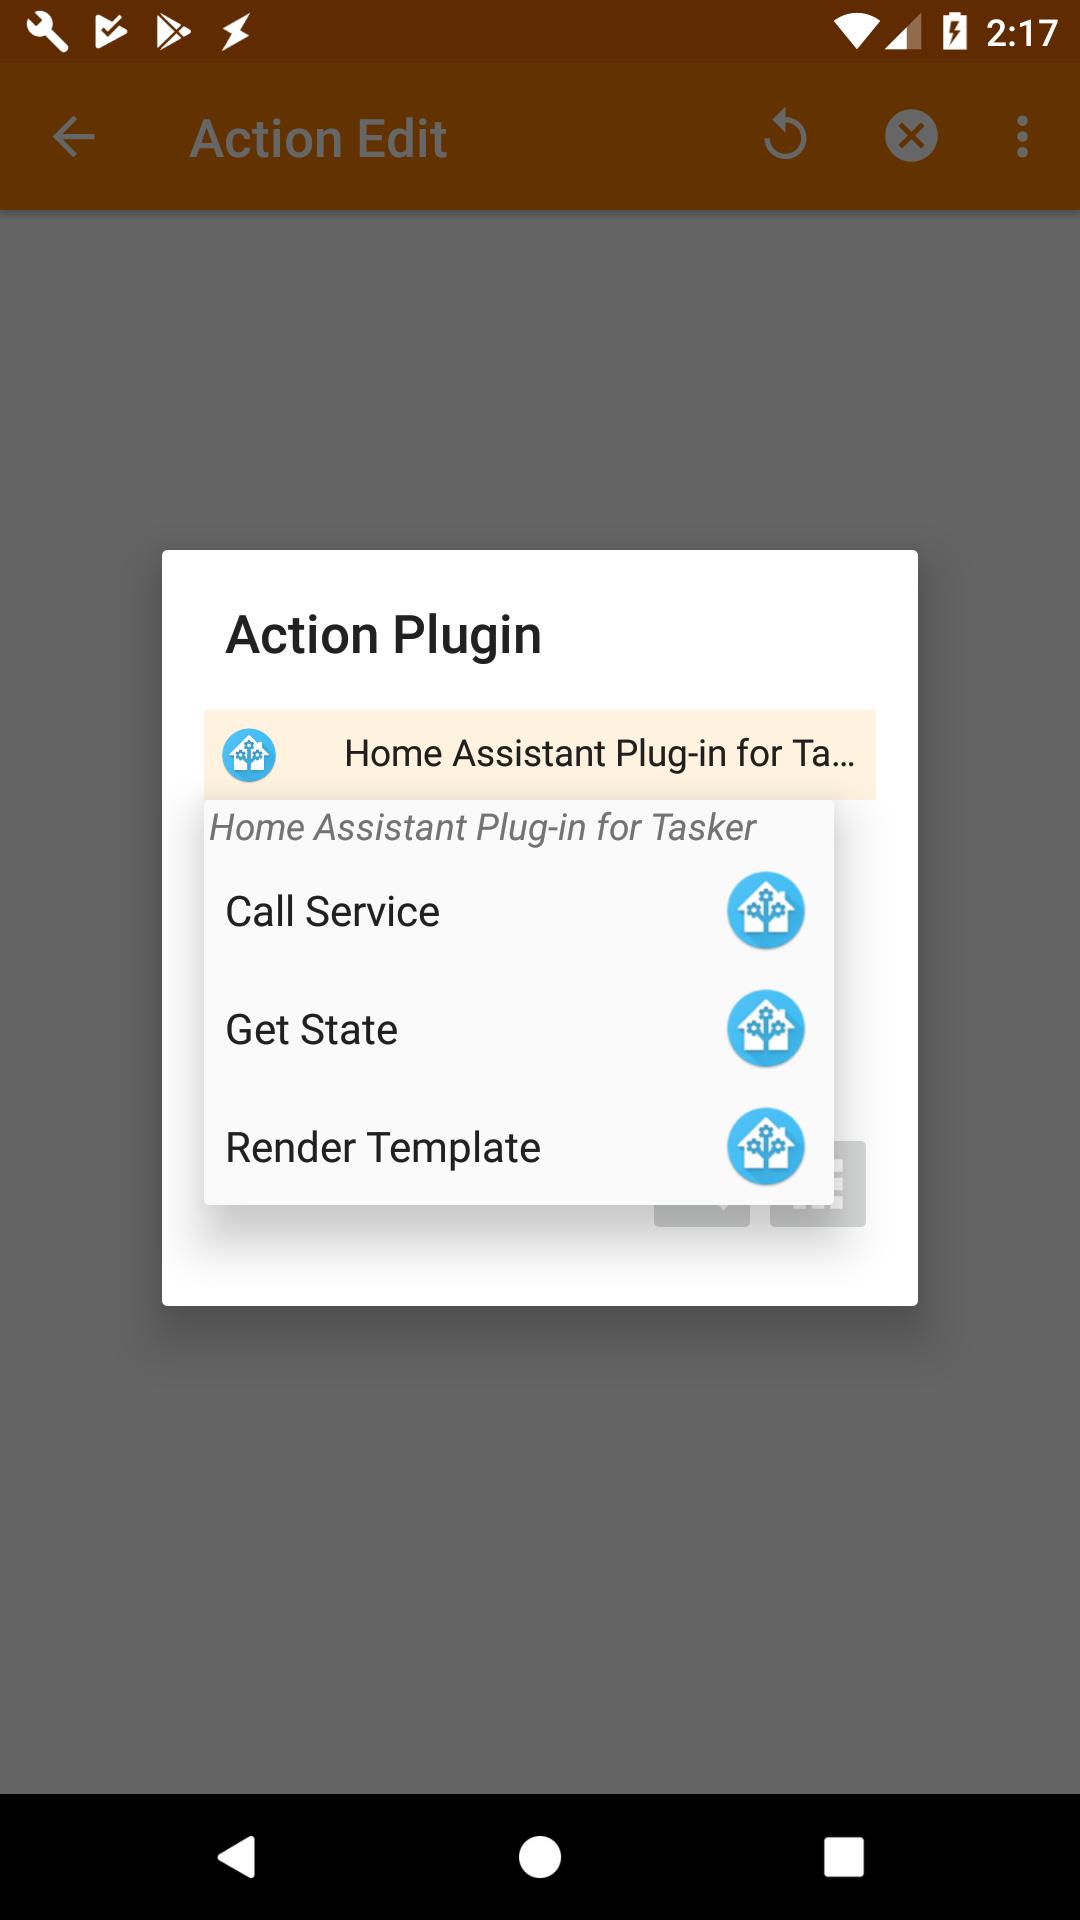 Home Assistant Plug-In for Tasker for Android - APK Download